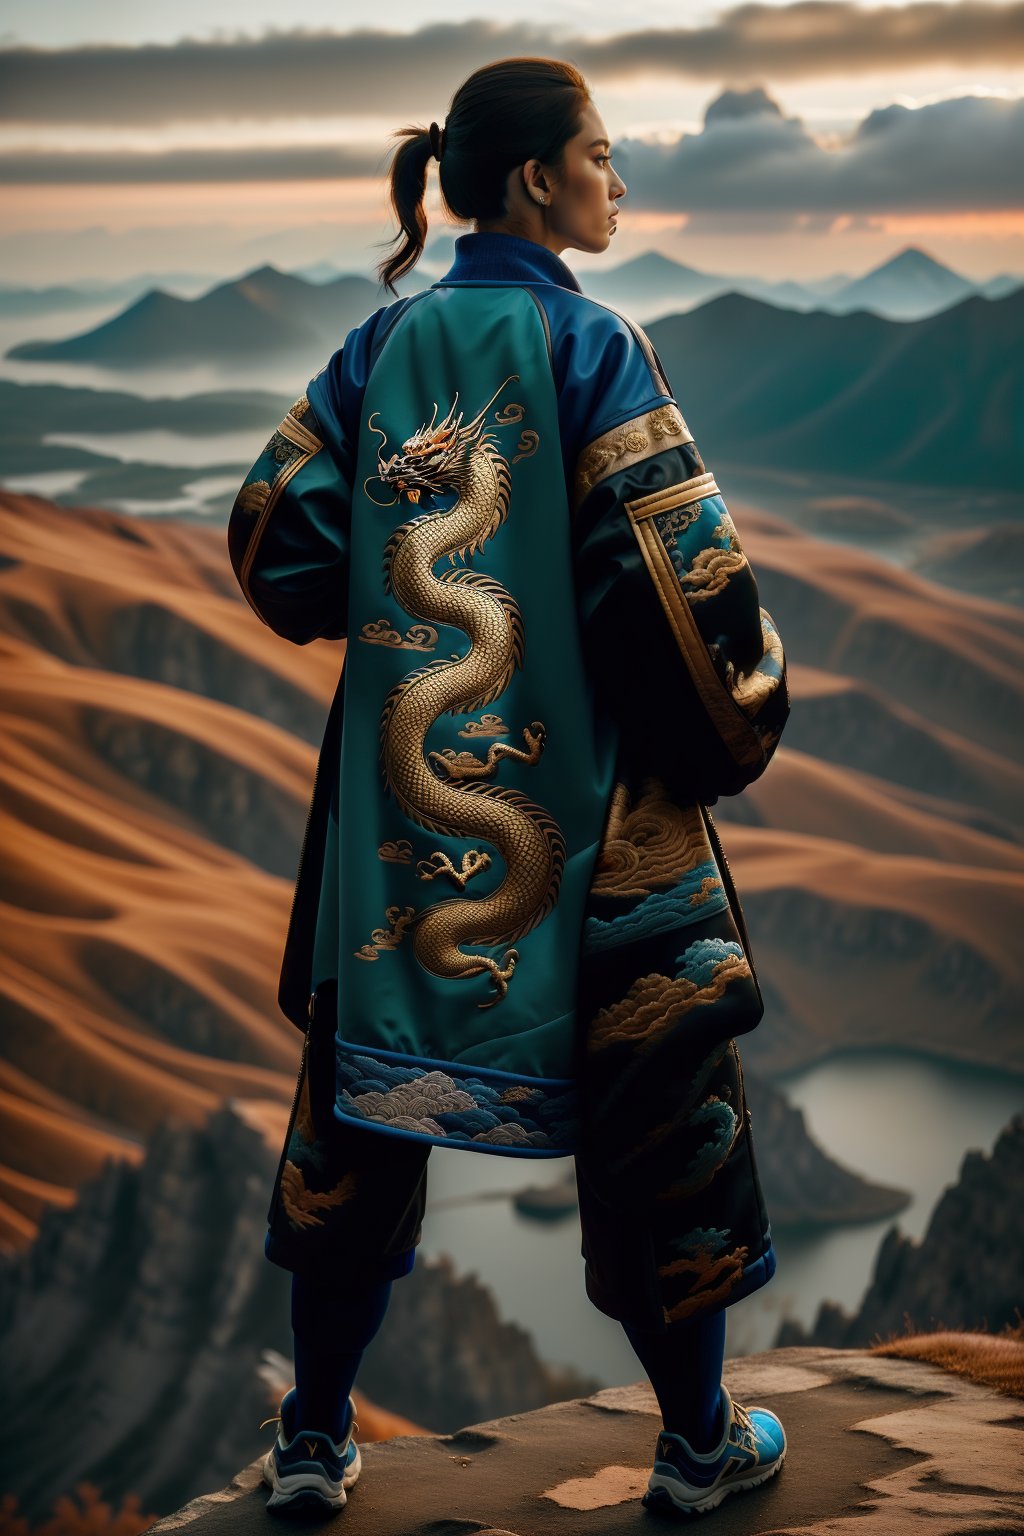 wo_dragonjacket01, from behind photo, (a woman at the top of a montain:1.2), blue jacket with a golden dragon, 8k, masterpiece, award-winning photography, high resolution